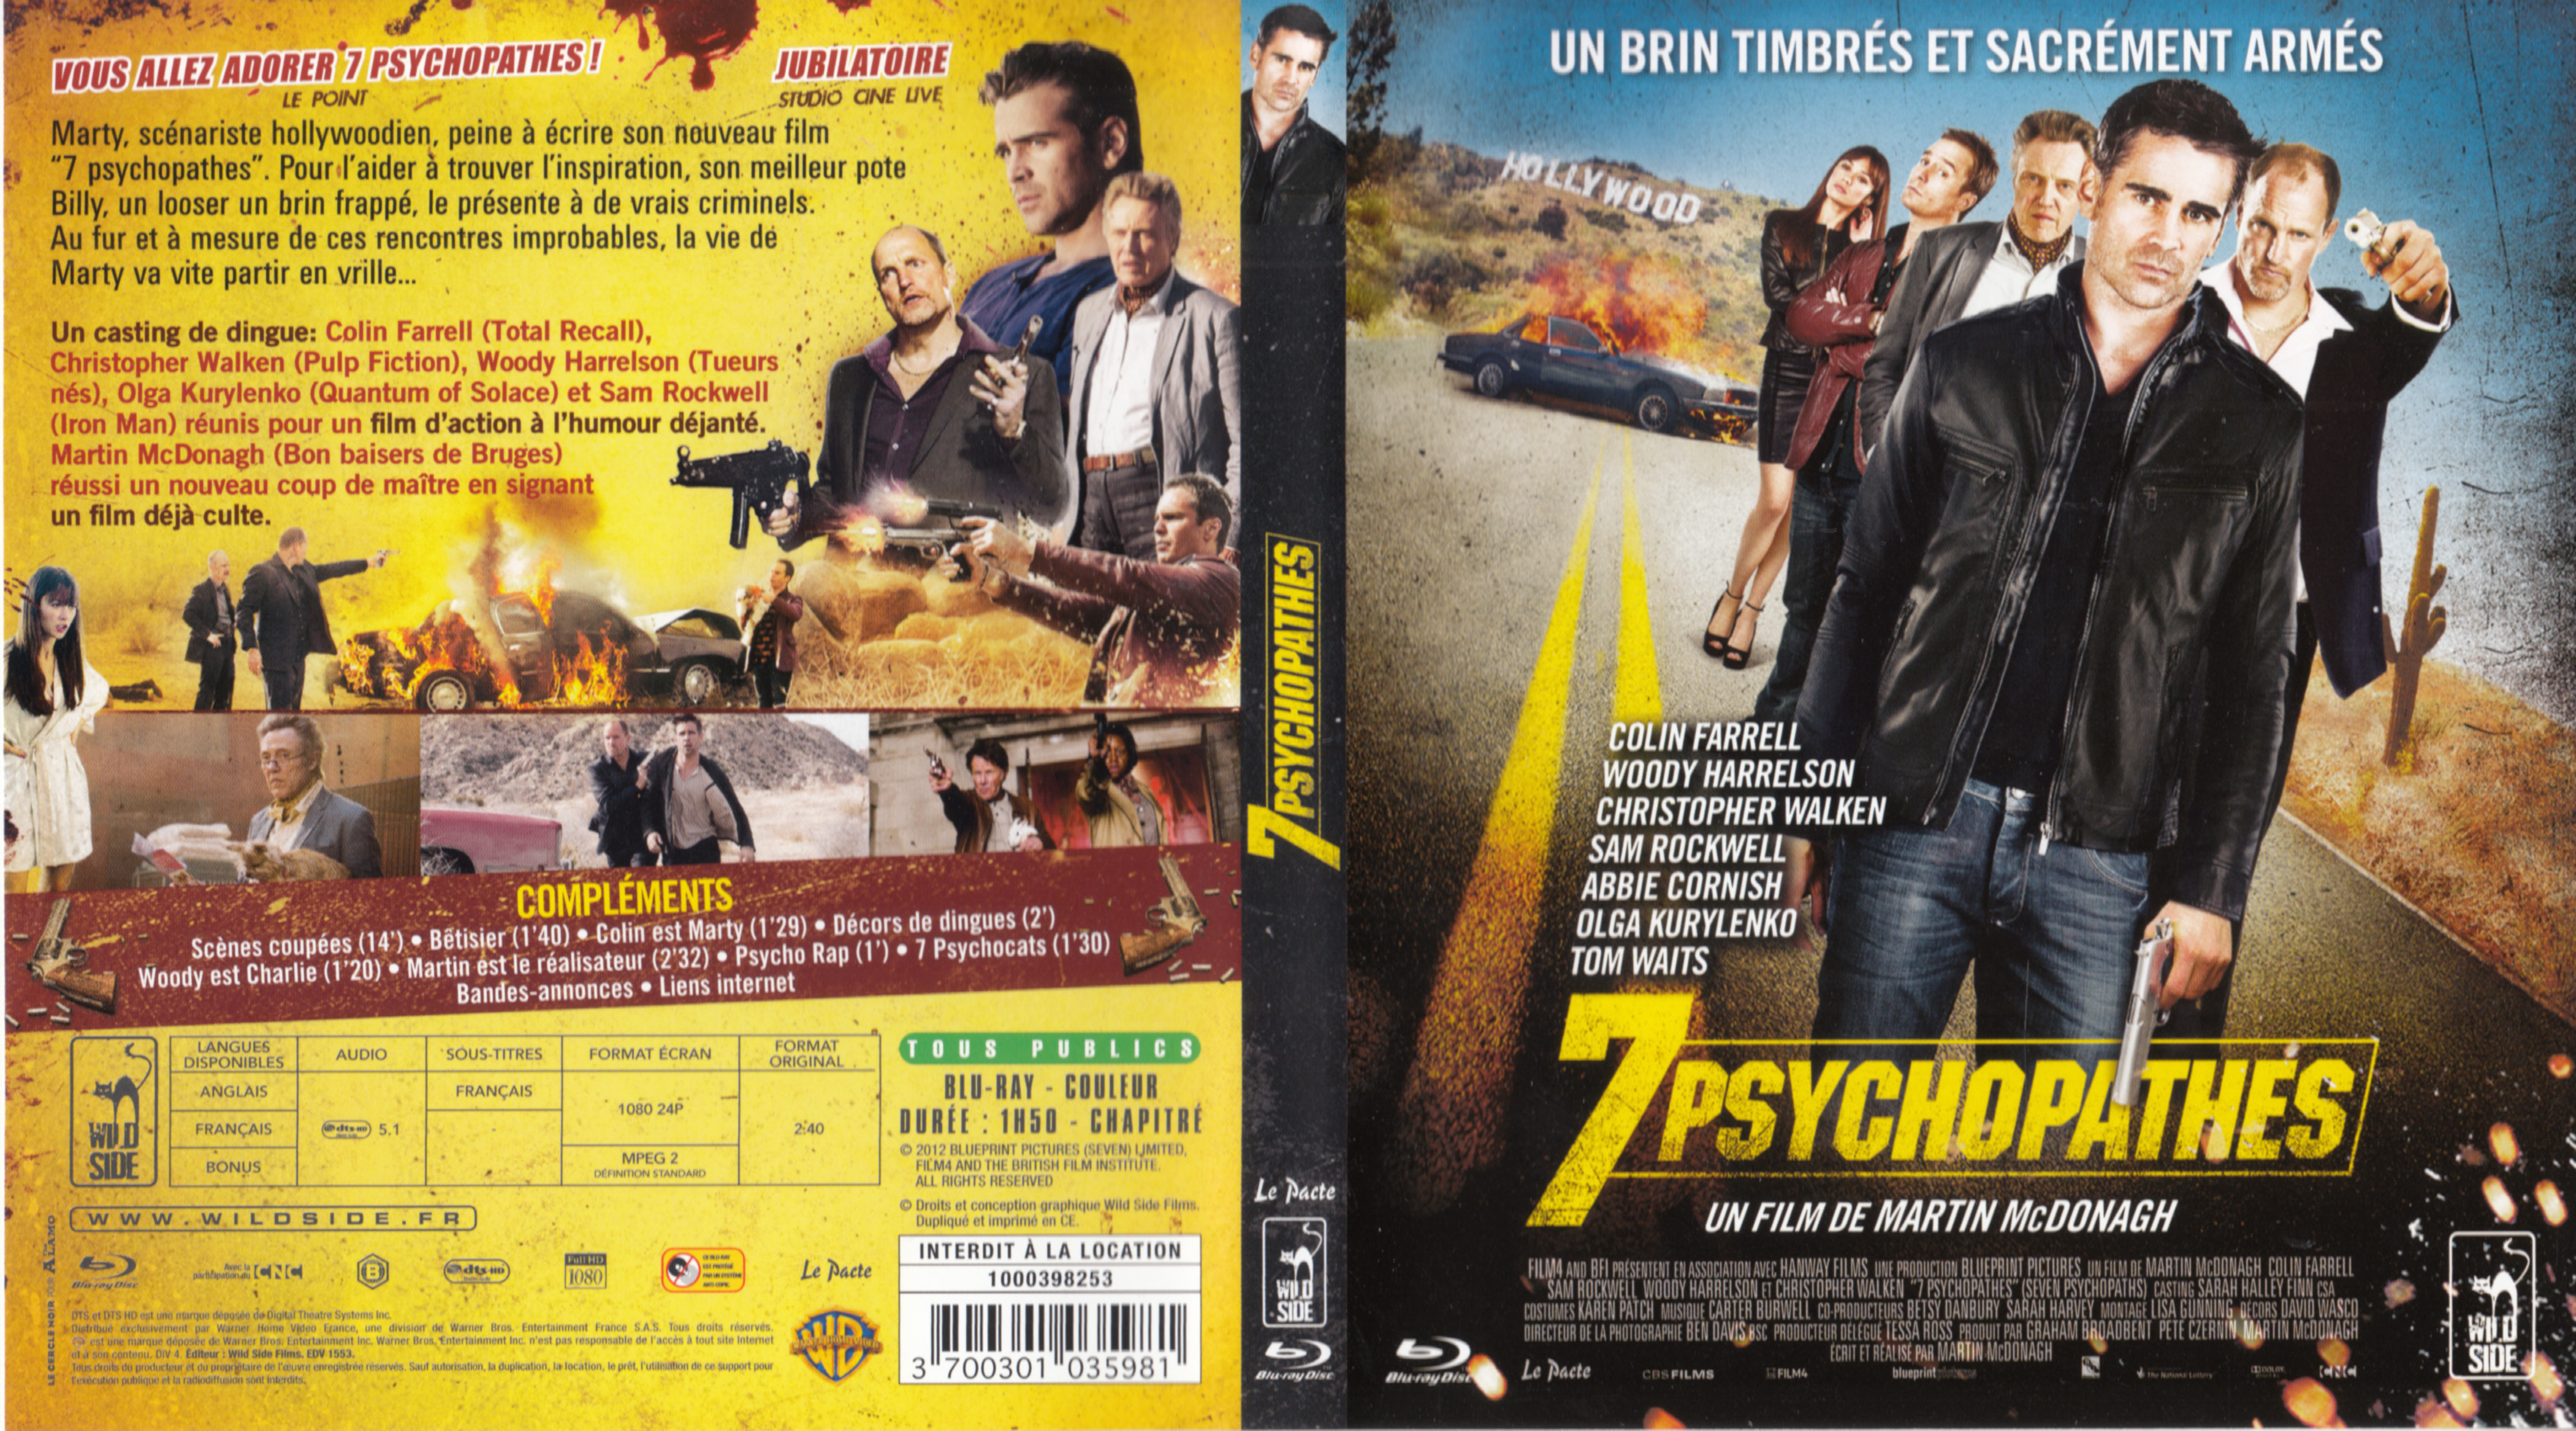 Jaquette DVD 7 Psychopathes (BLU-RAY) v3